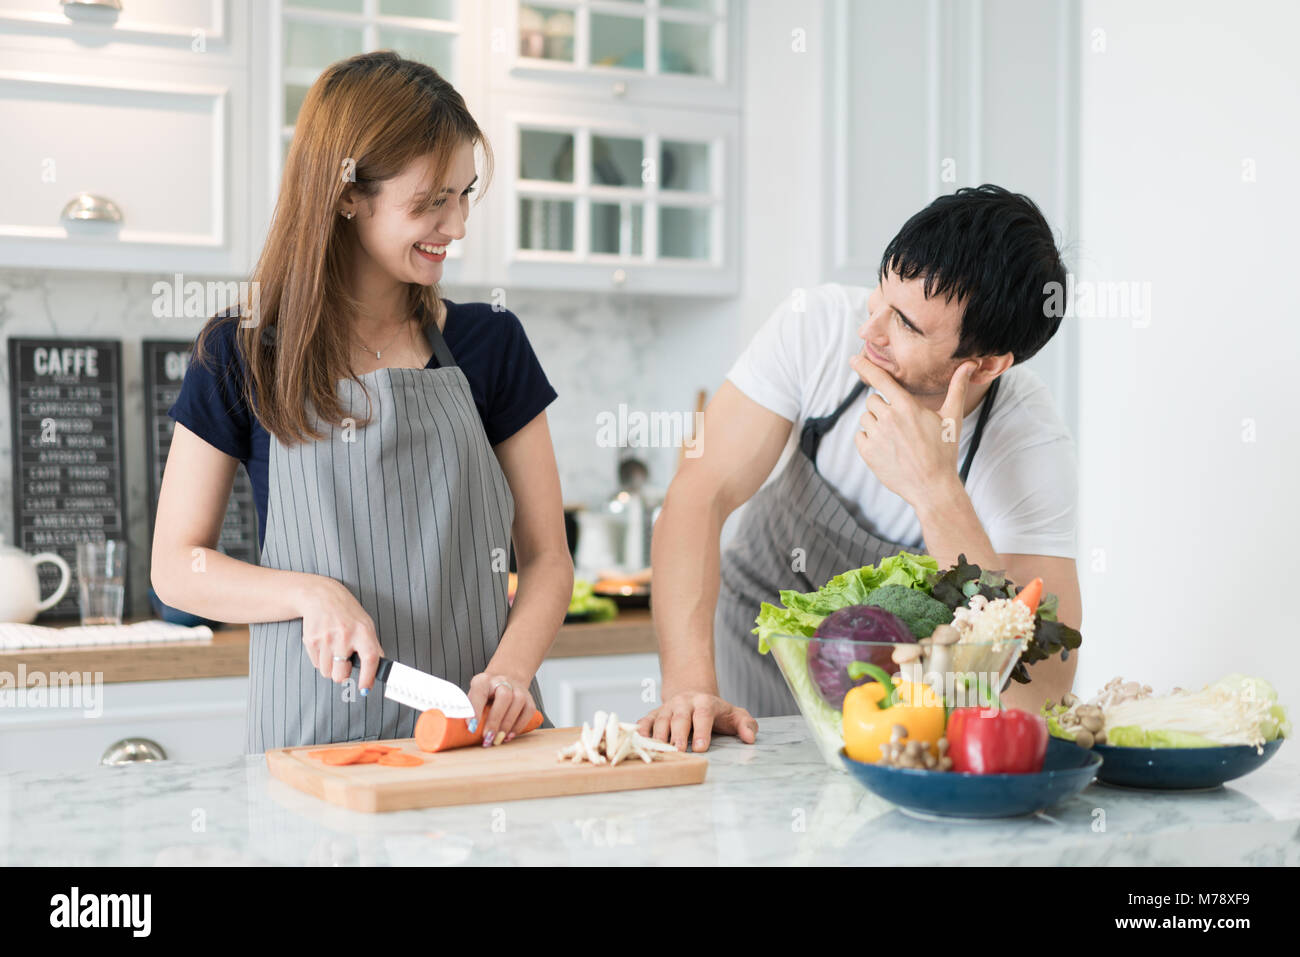 Young Asian couple preparing food together at counter in kitchen. Happy love couple concept. Stock Photo